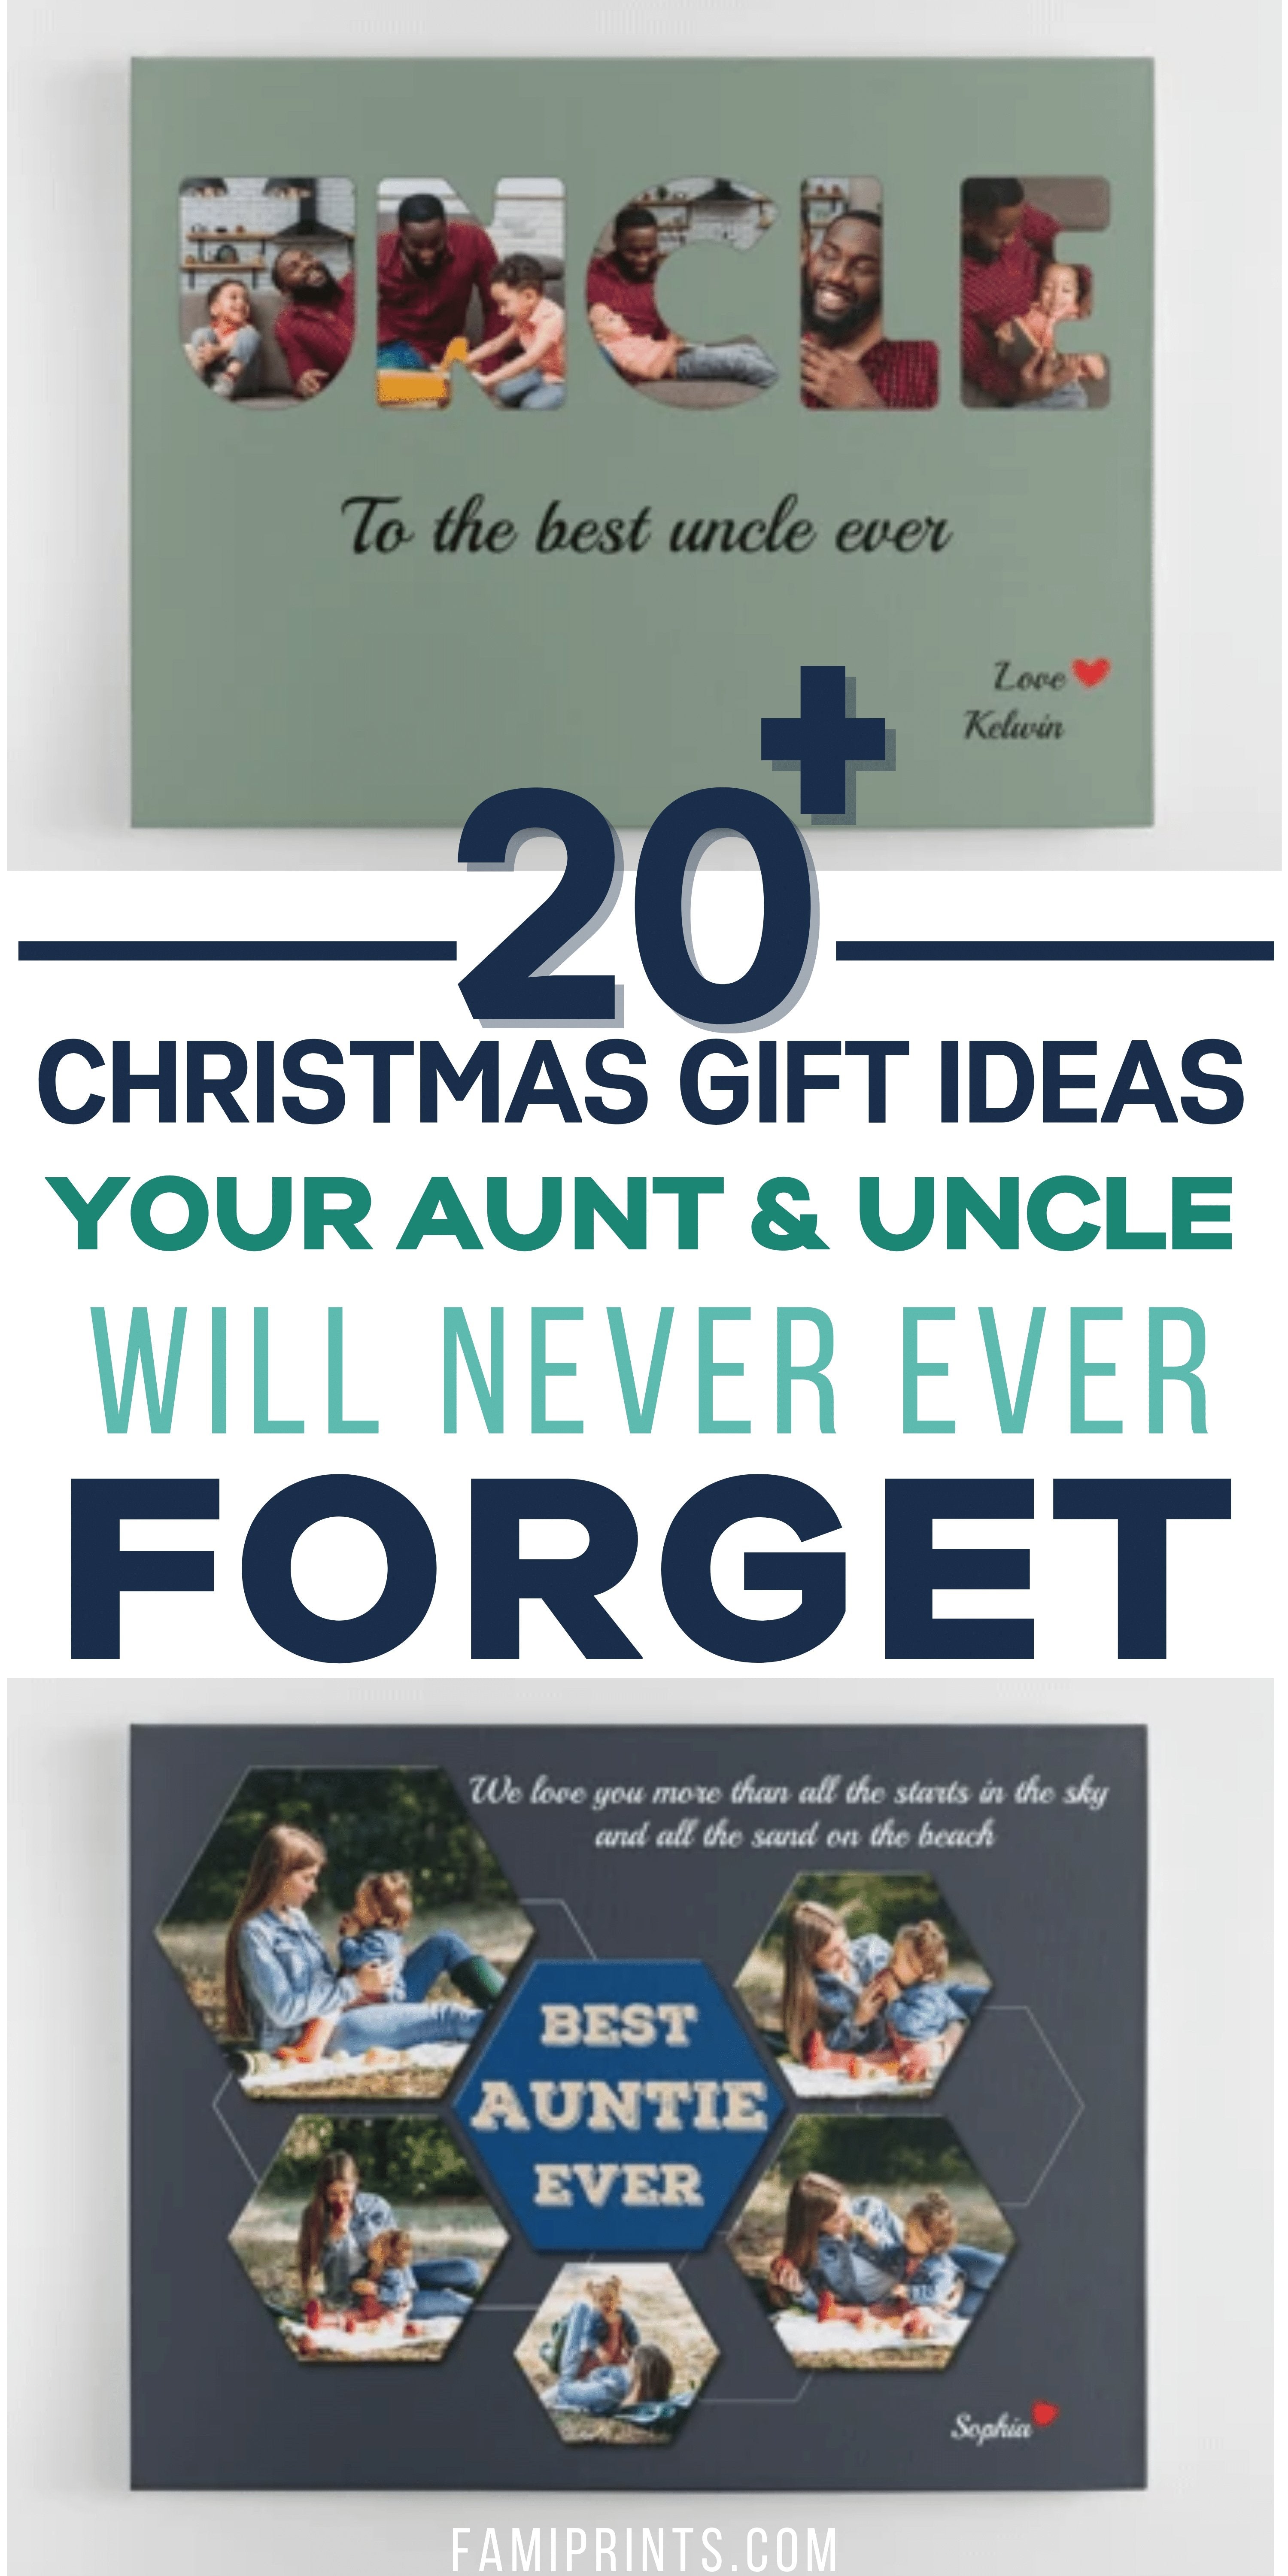 Personalized Christmas Gifts For Aunts & Uncles From Kids | FamiPrints | Trending Personalized Family Gifts